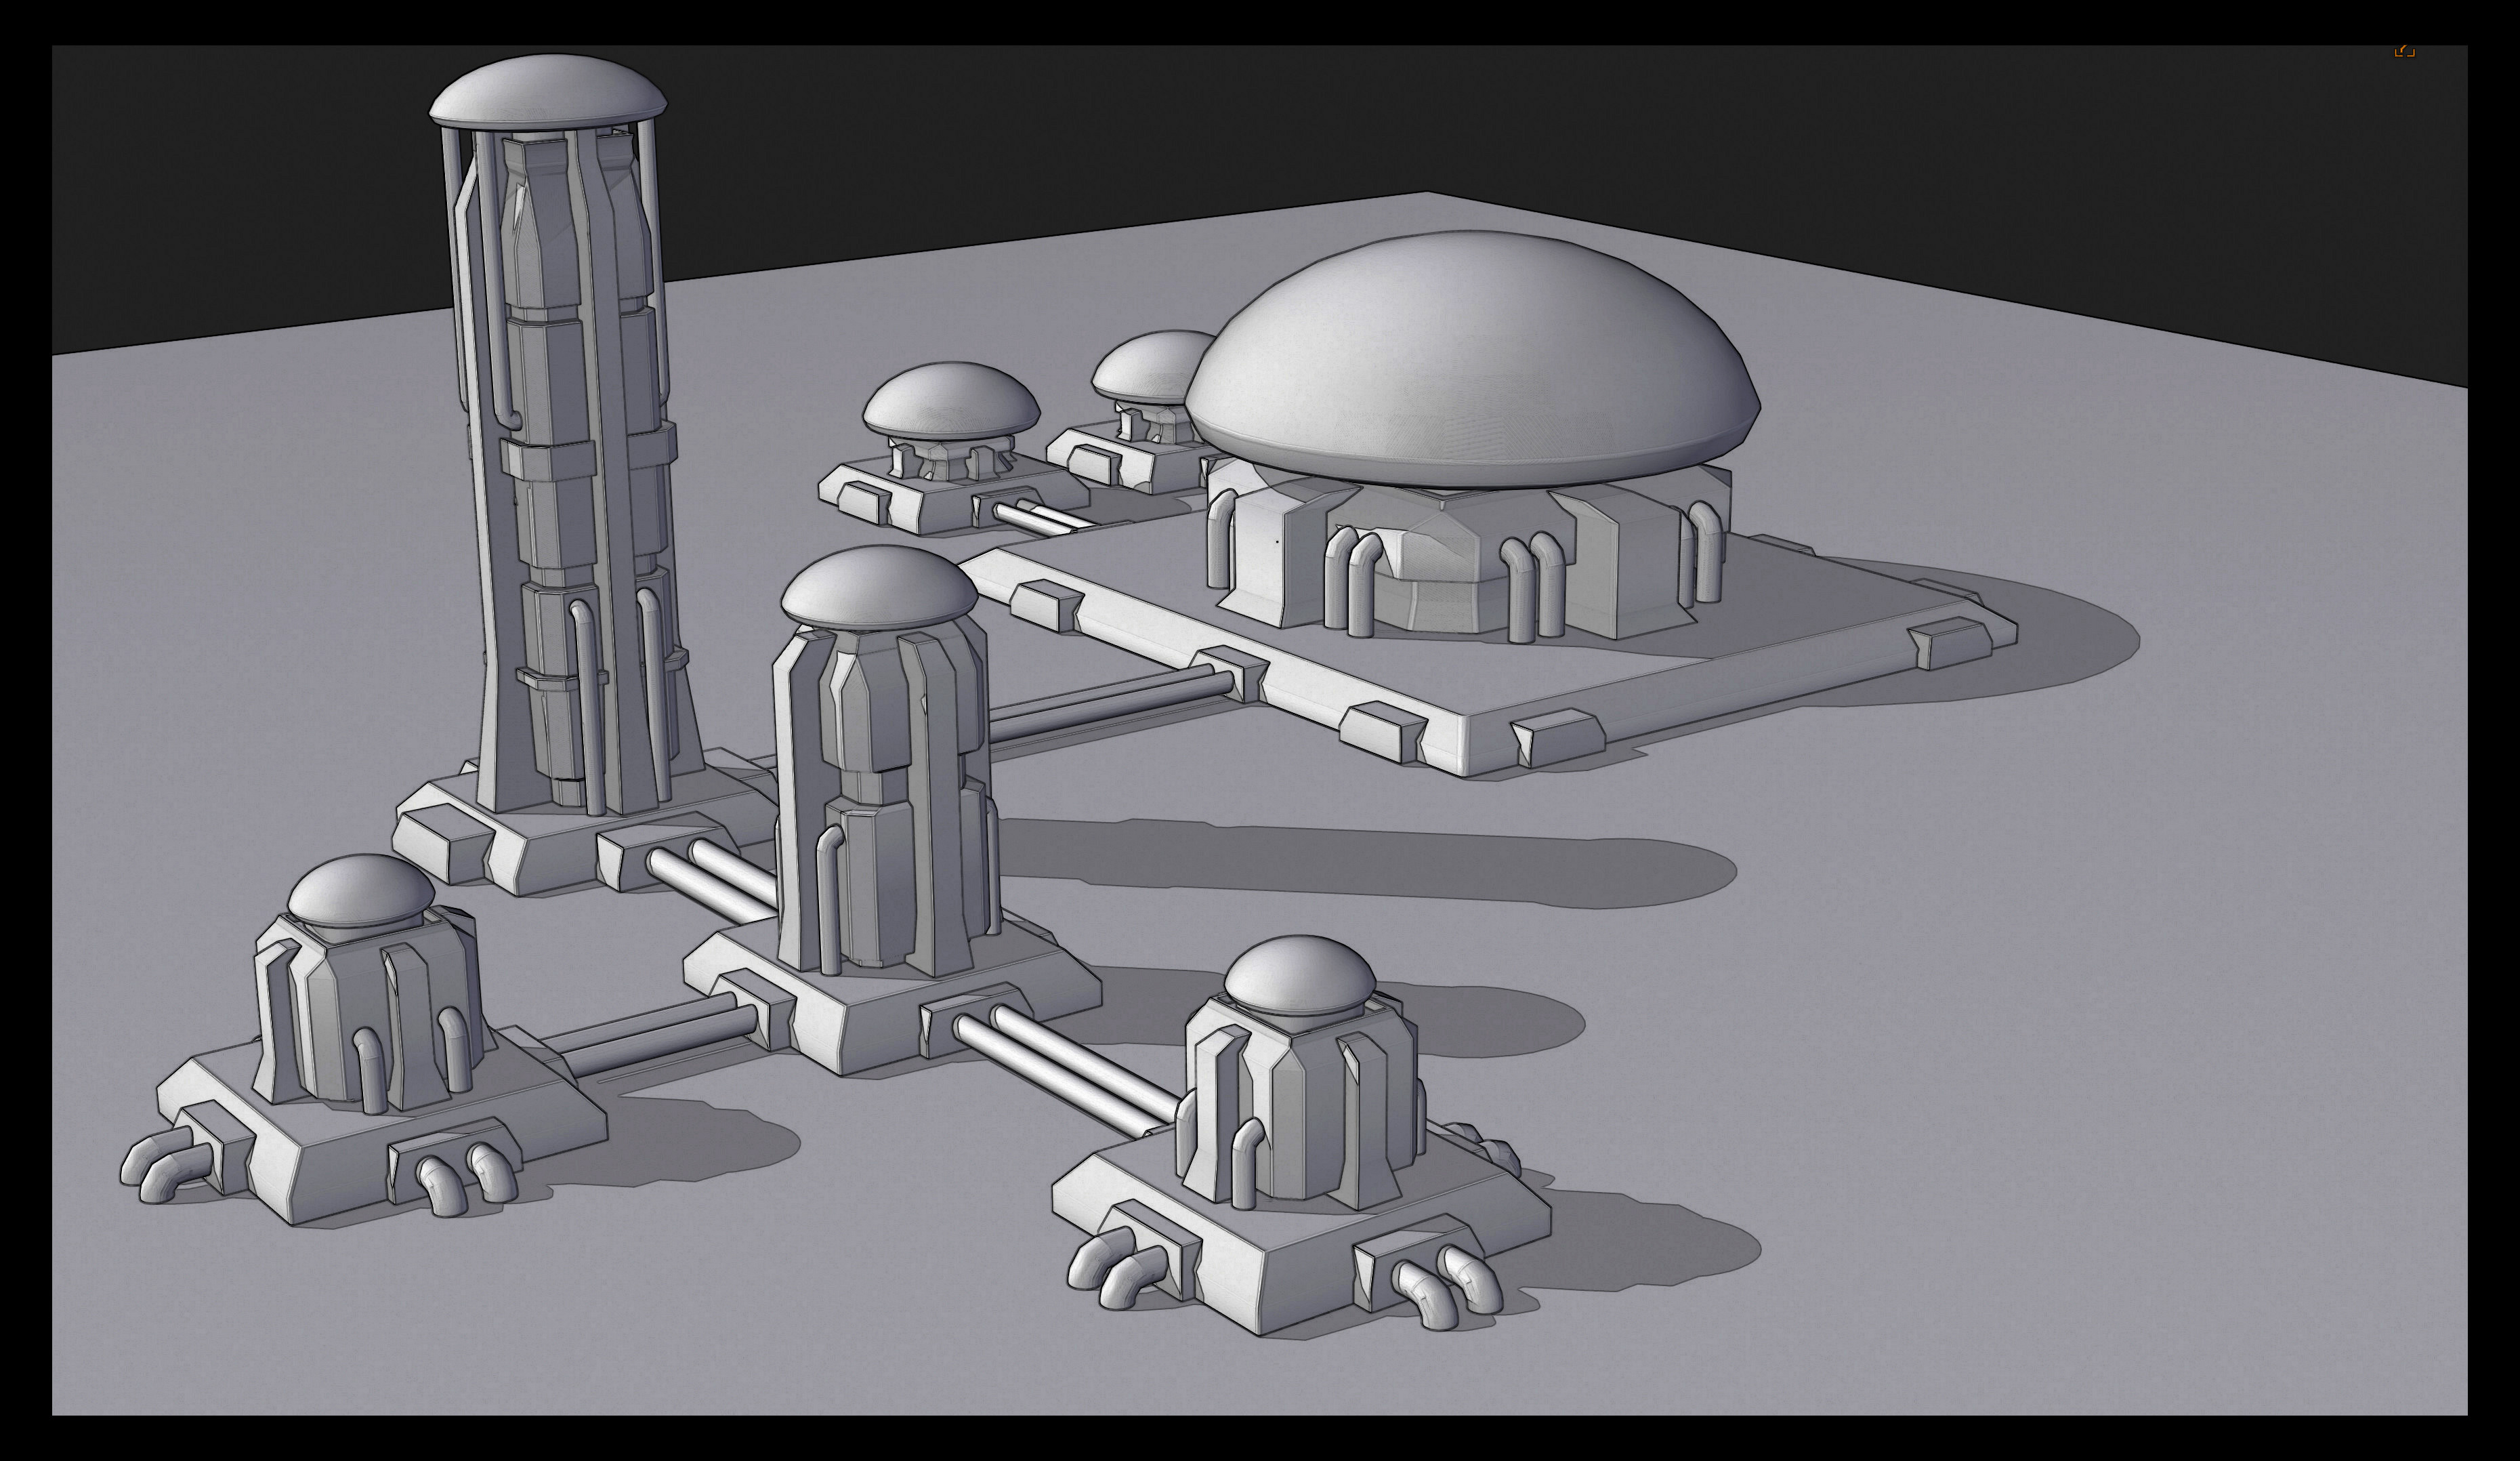 The distinctive domes were added and immediately I had a better idea of what the industrial zone would look like